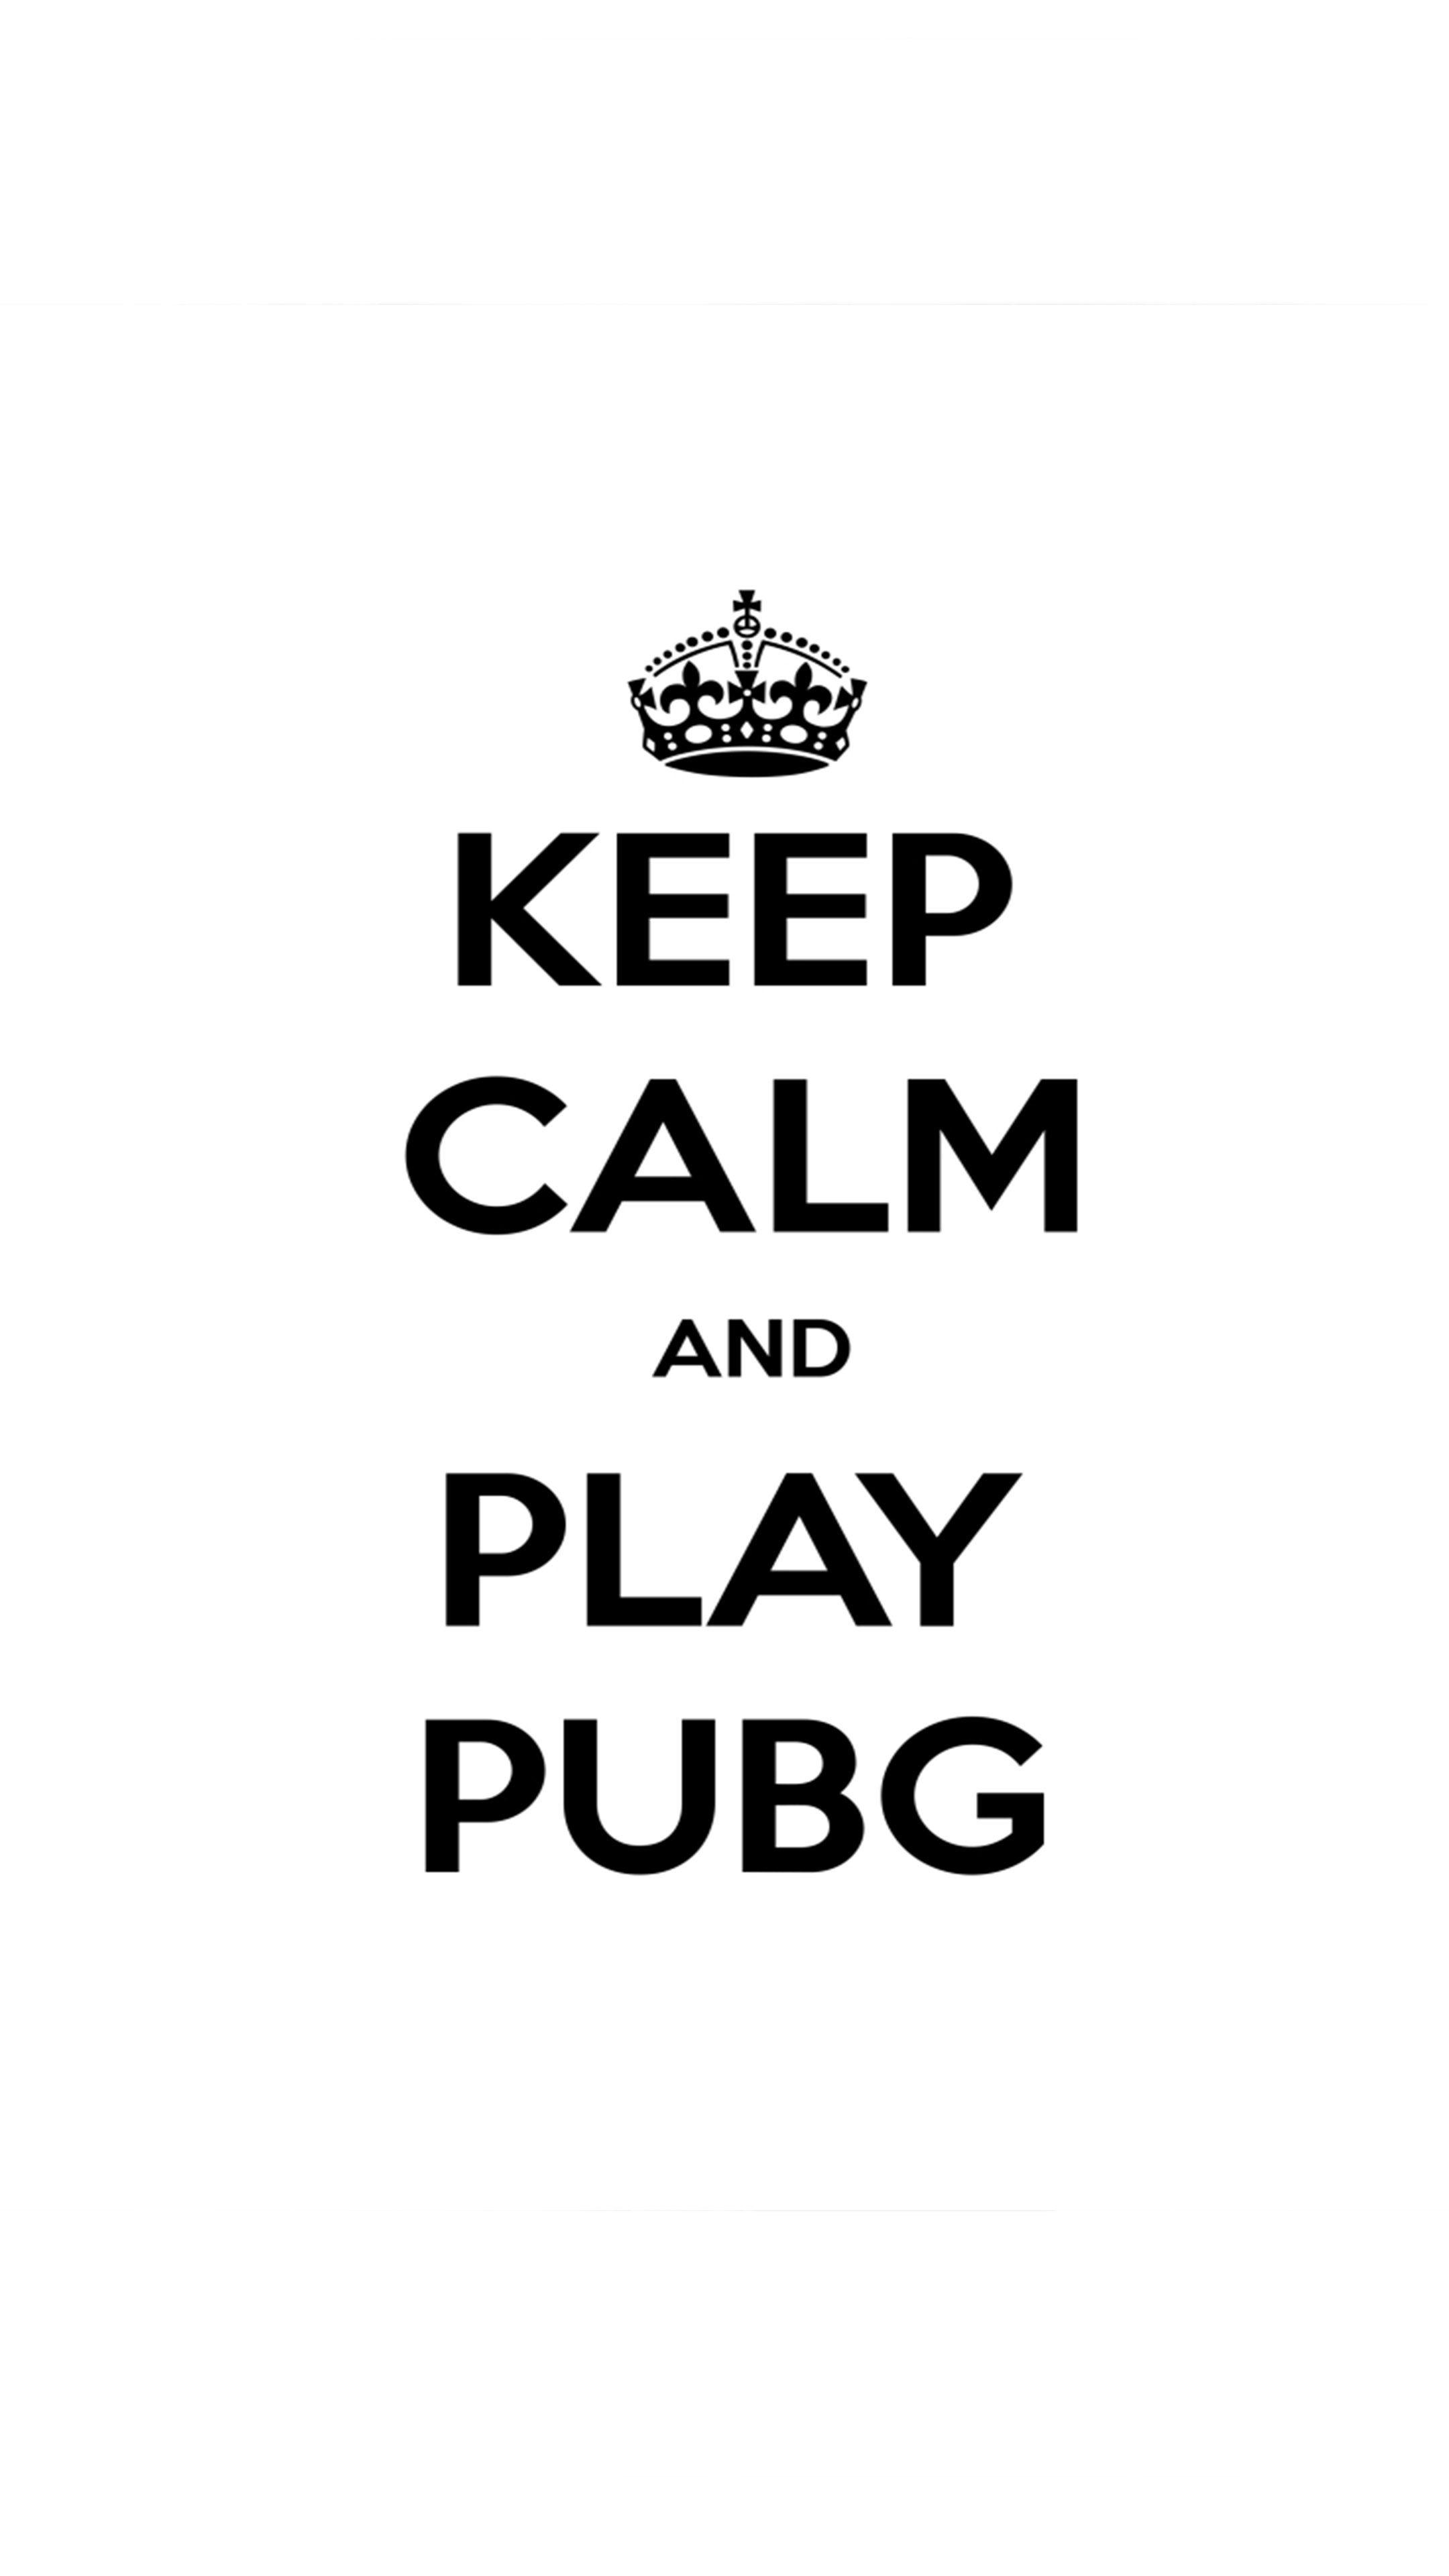 Keep Calm And Play PUBG. Mobile wallpaper. Mobile legend